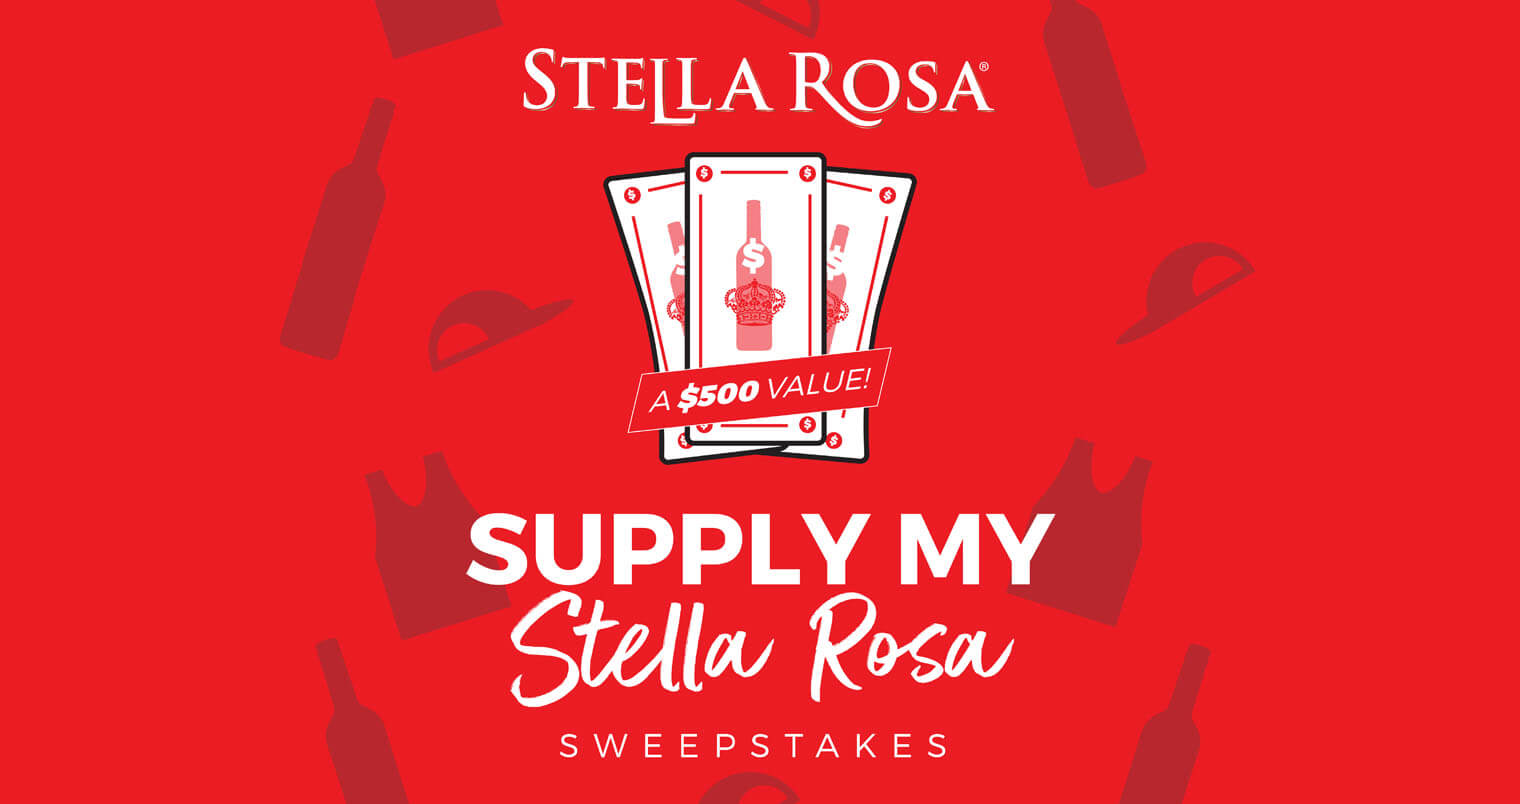 Supply My Stella Rosa Sweepstakes, featured image